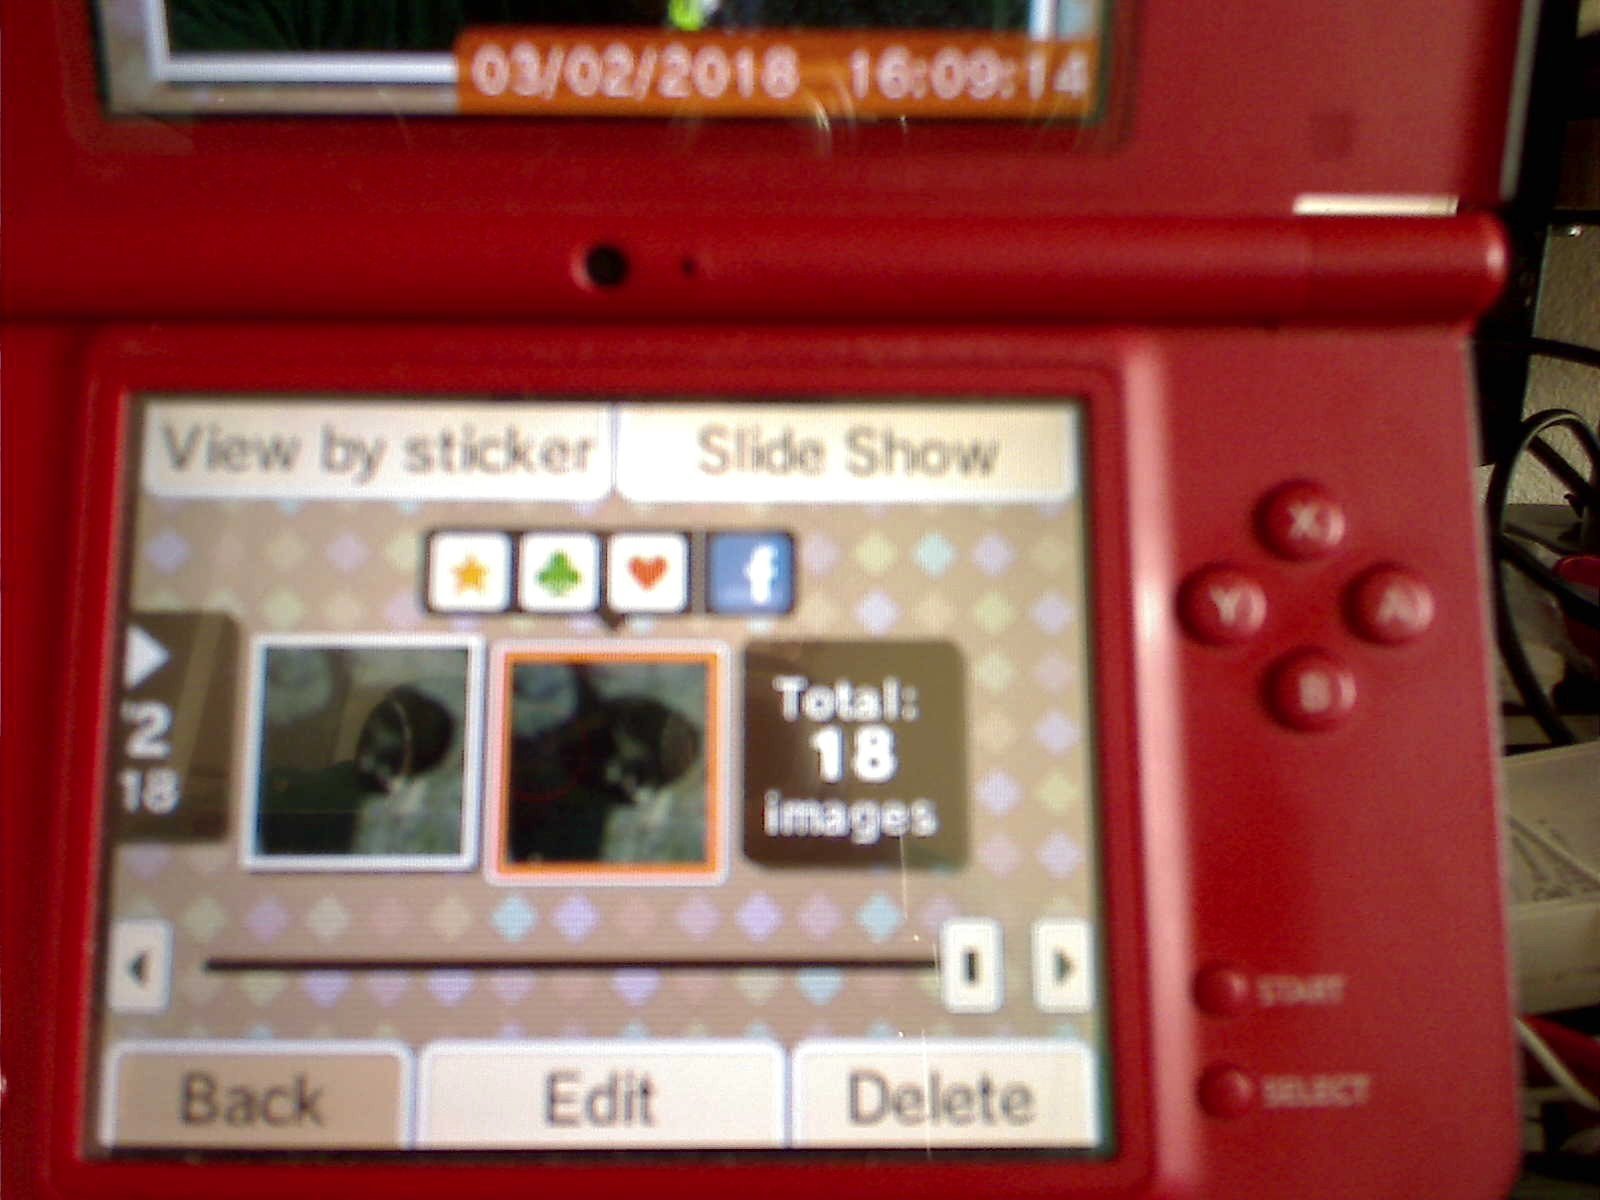 Nintendo shows off new DSi with camera, app store